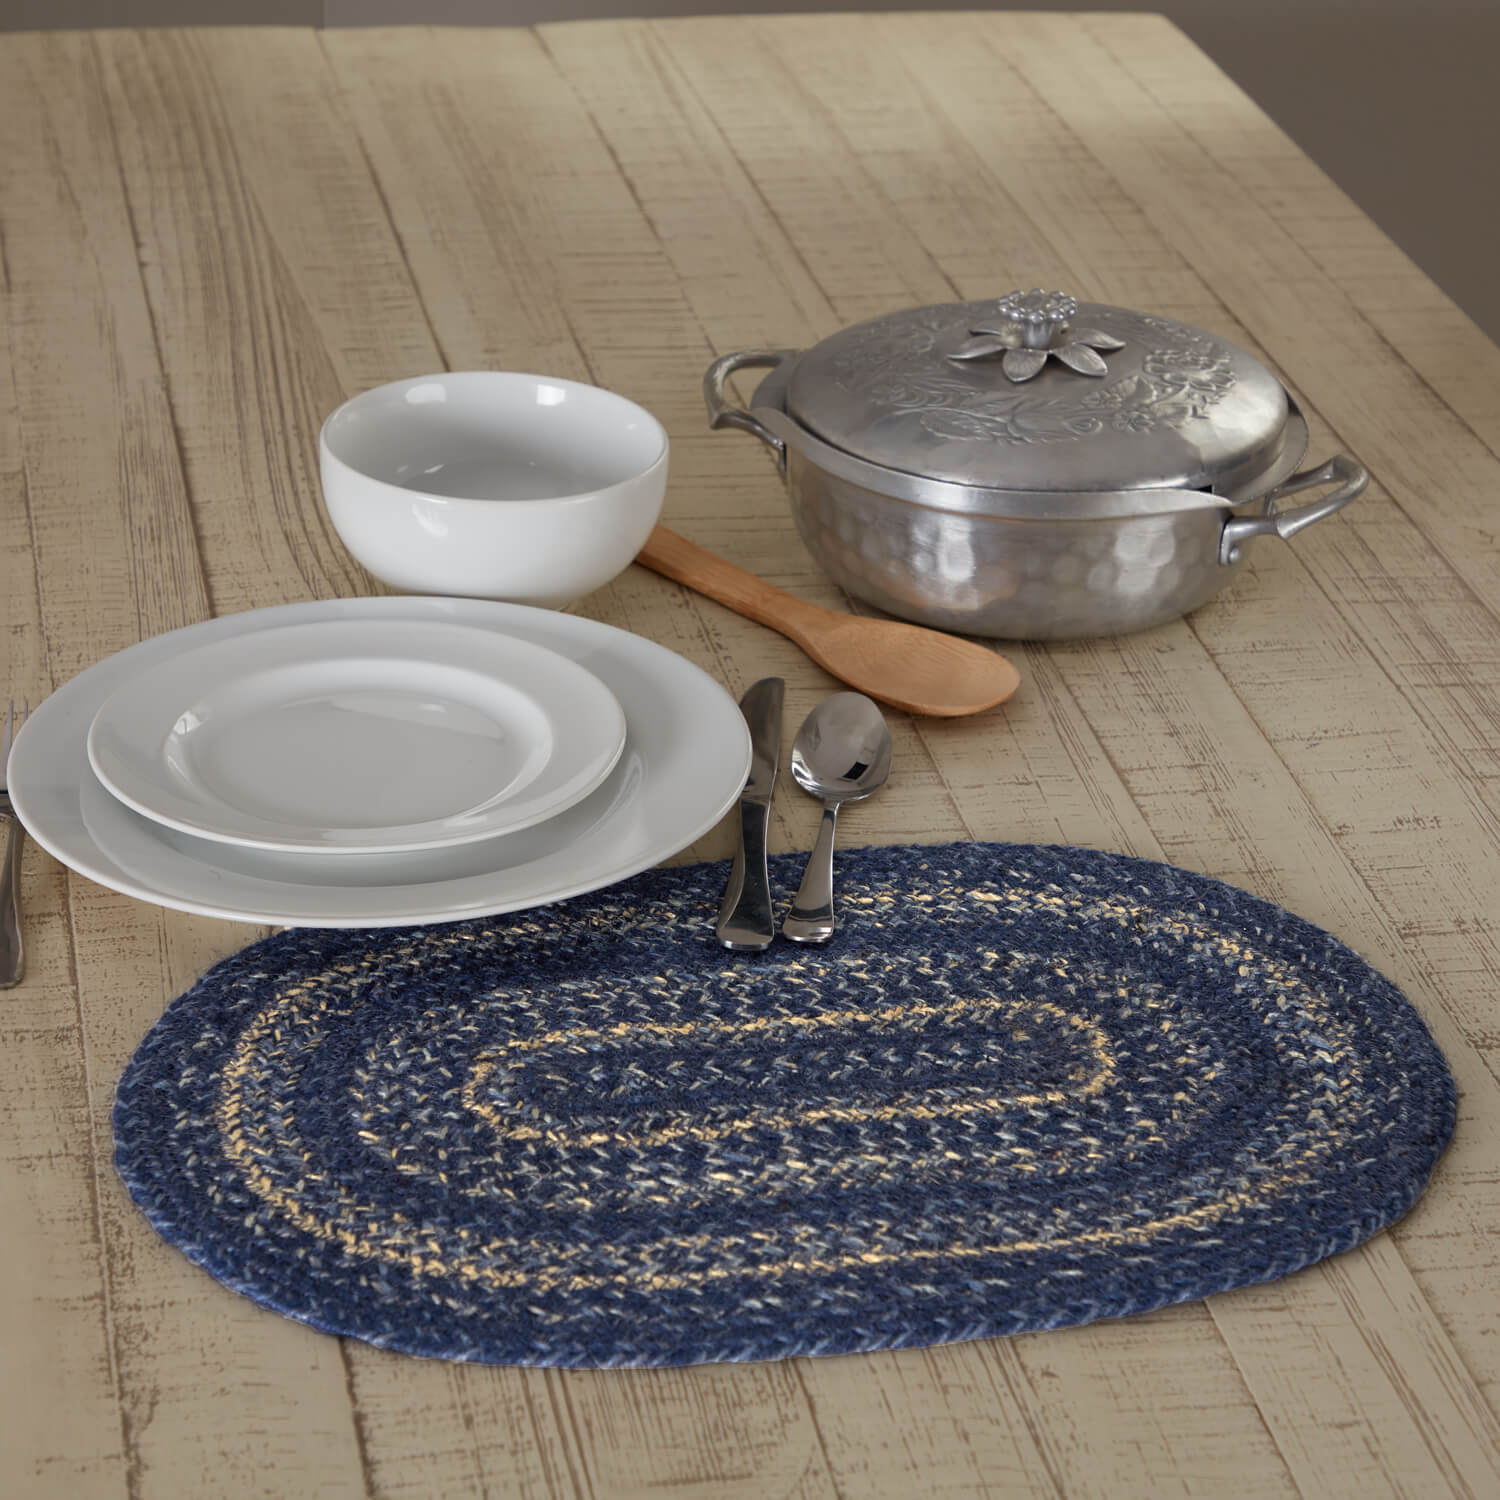 Great Falls Tableware and Kitchenware